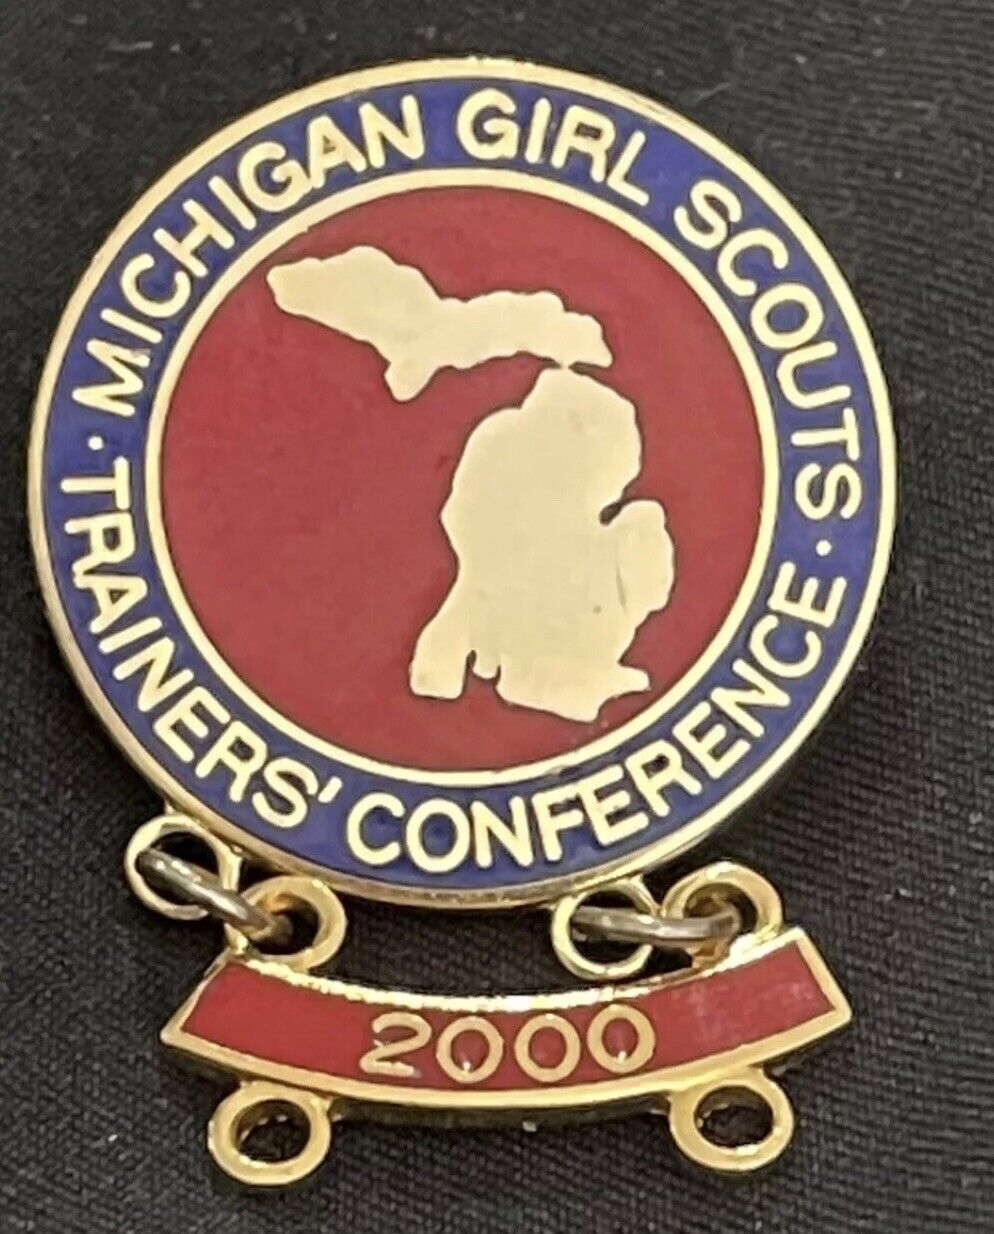 REDUCED NEW Vintage Girl Scouts TRAINERS’ CONFERENCE PIN MICHIGAN 2000